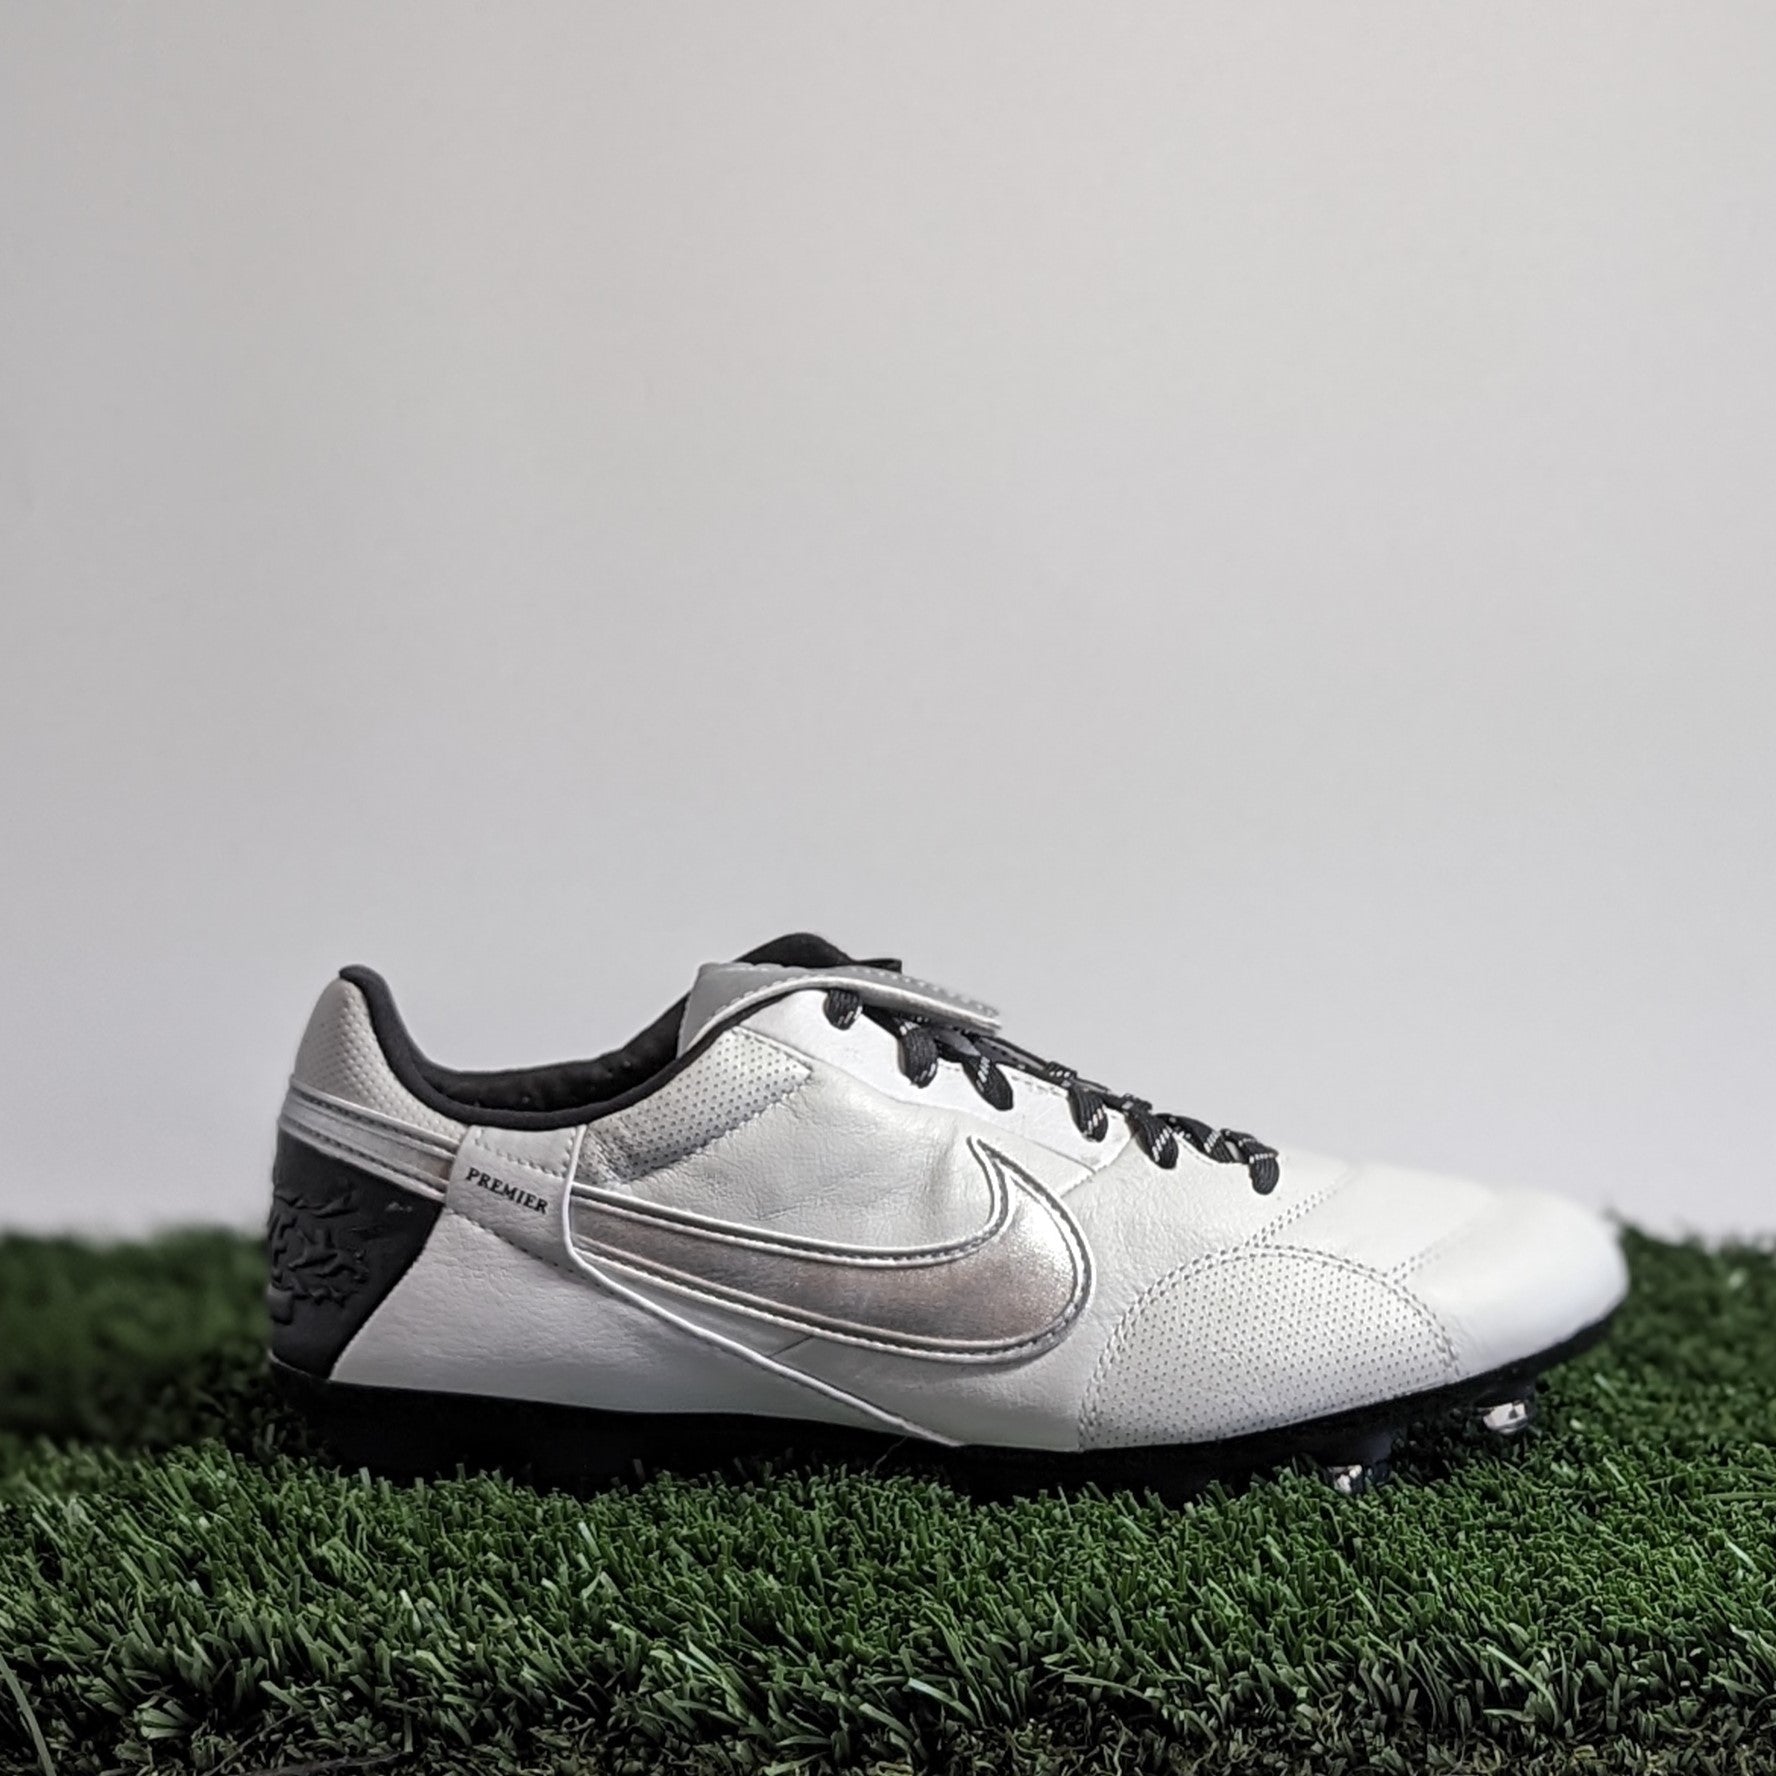 The Nike Premier III FG - AT5889-006